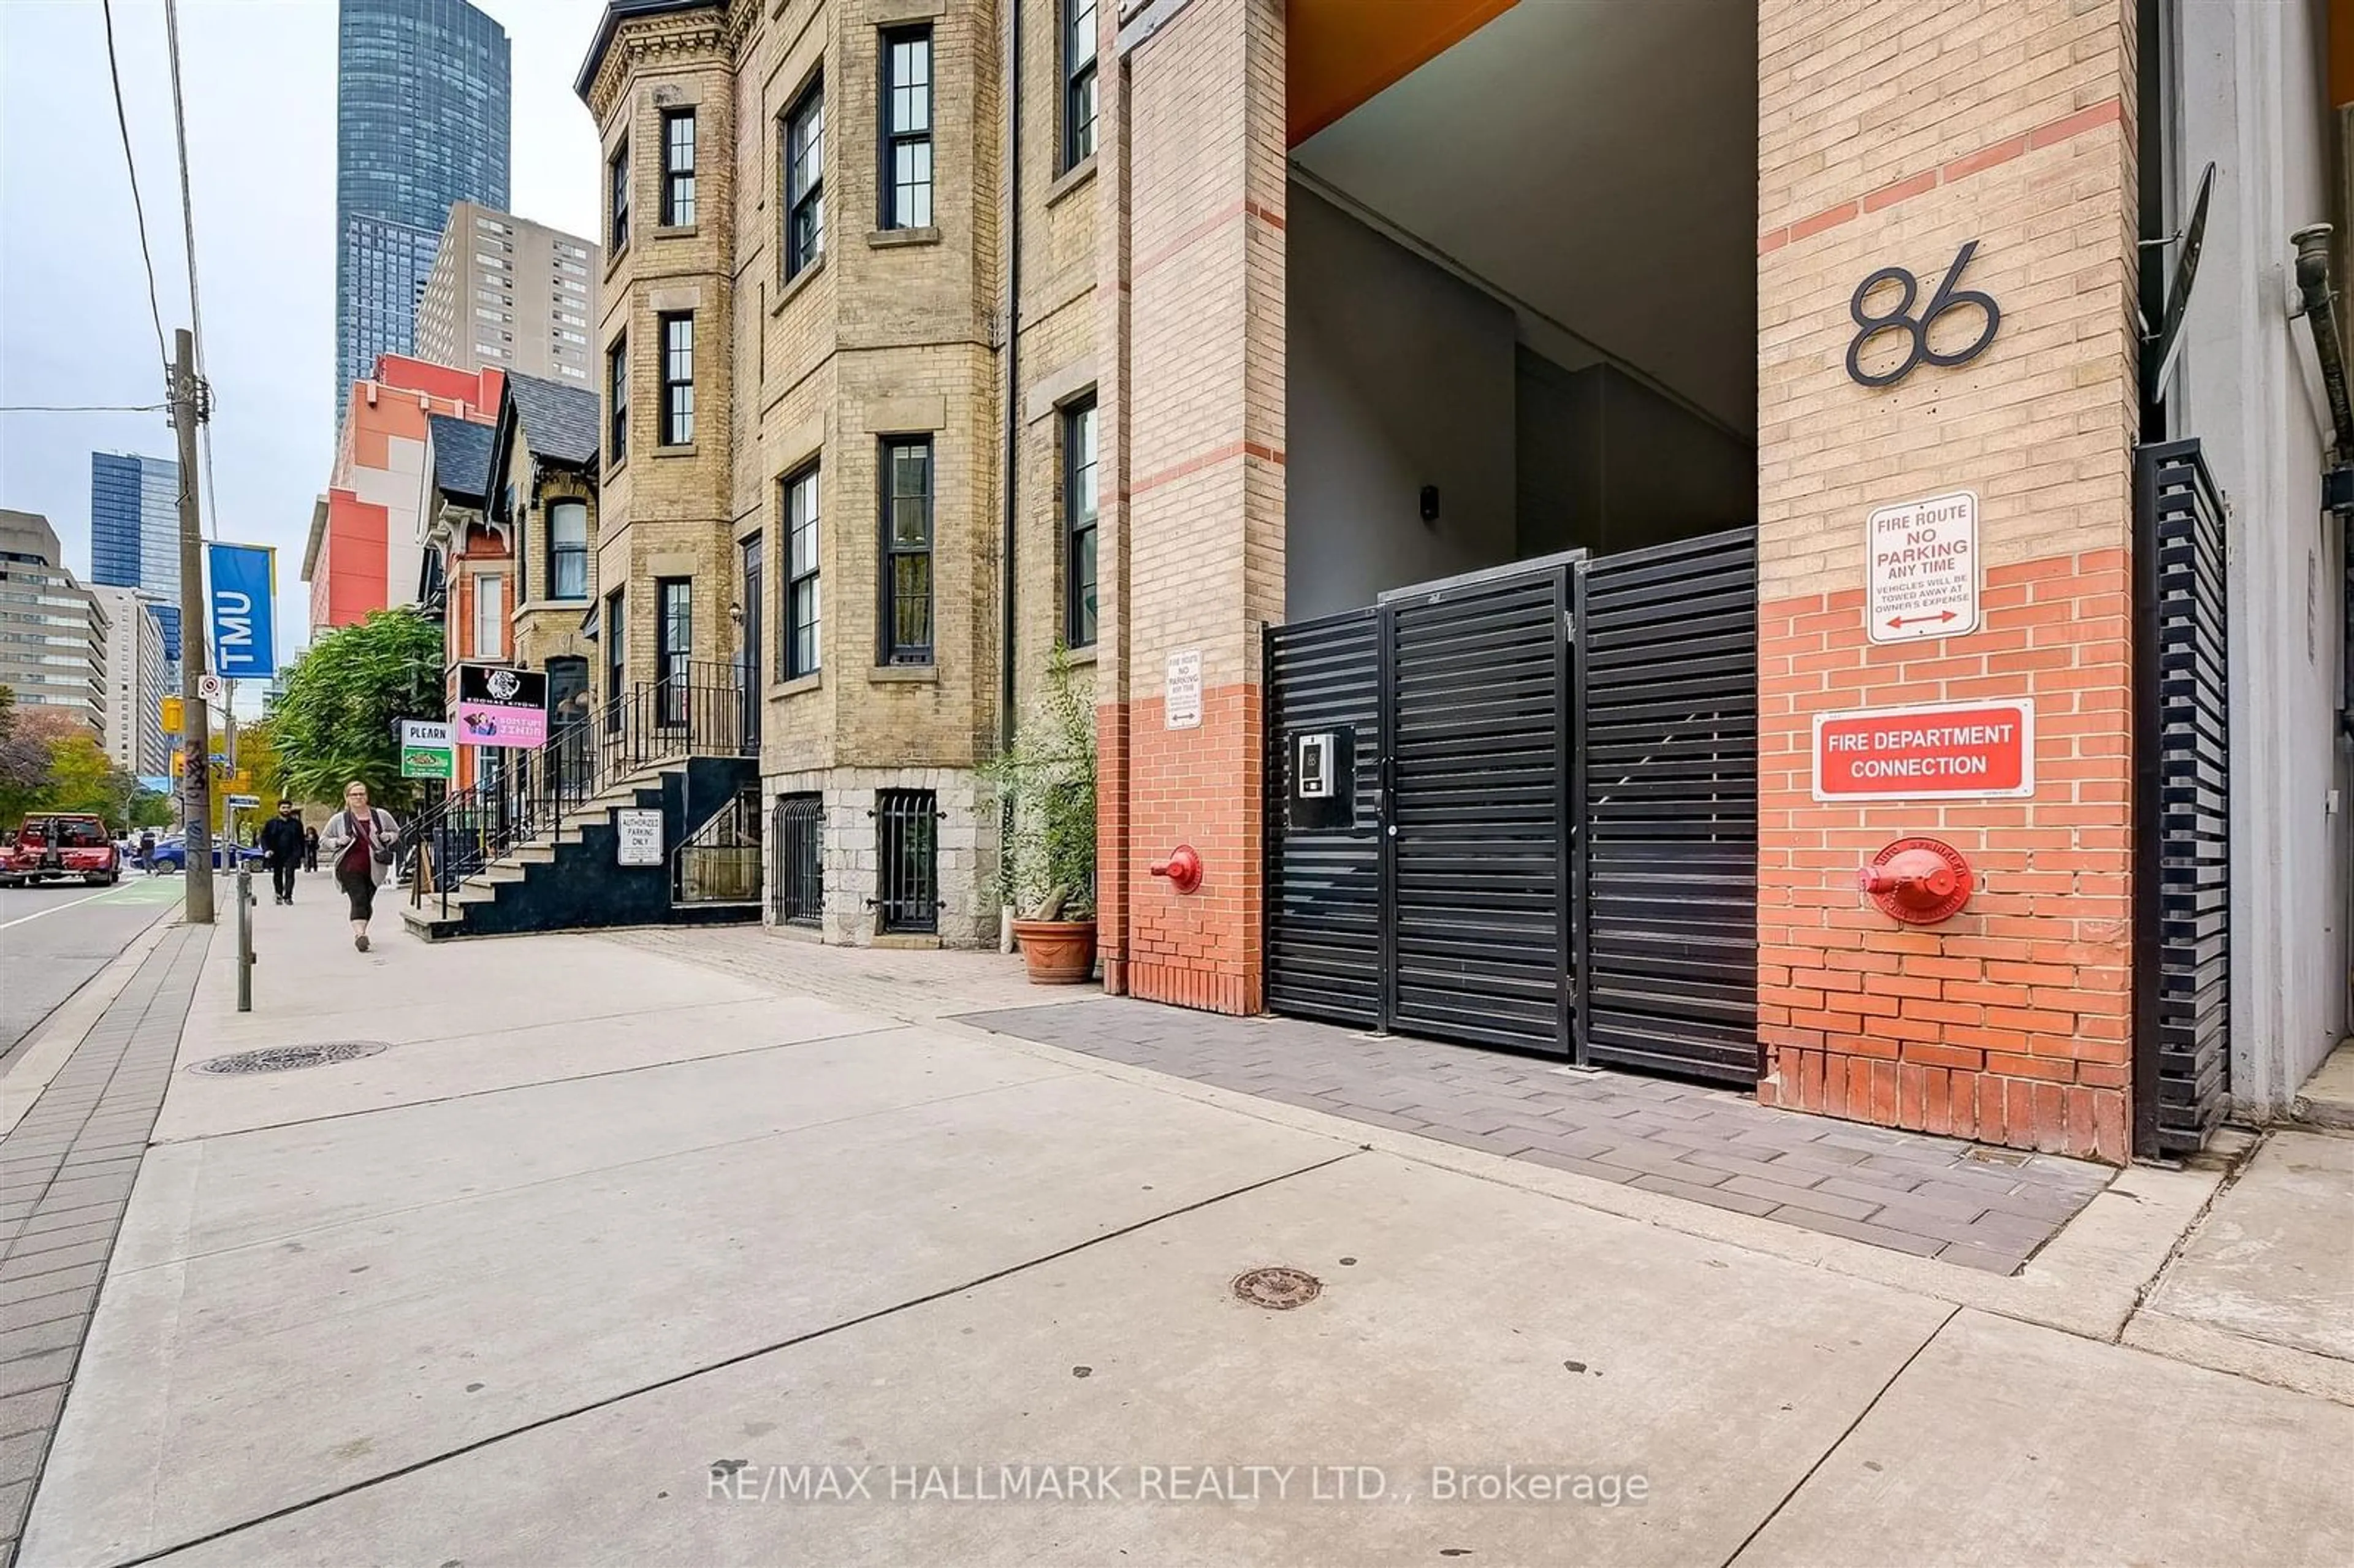 A pic from exterior of the house or condo for 86 gerrard St #8E, Toronto Ontario M5B 2J1